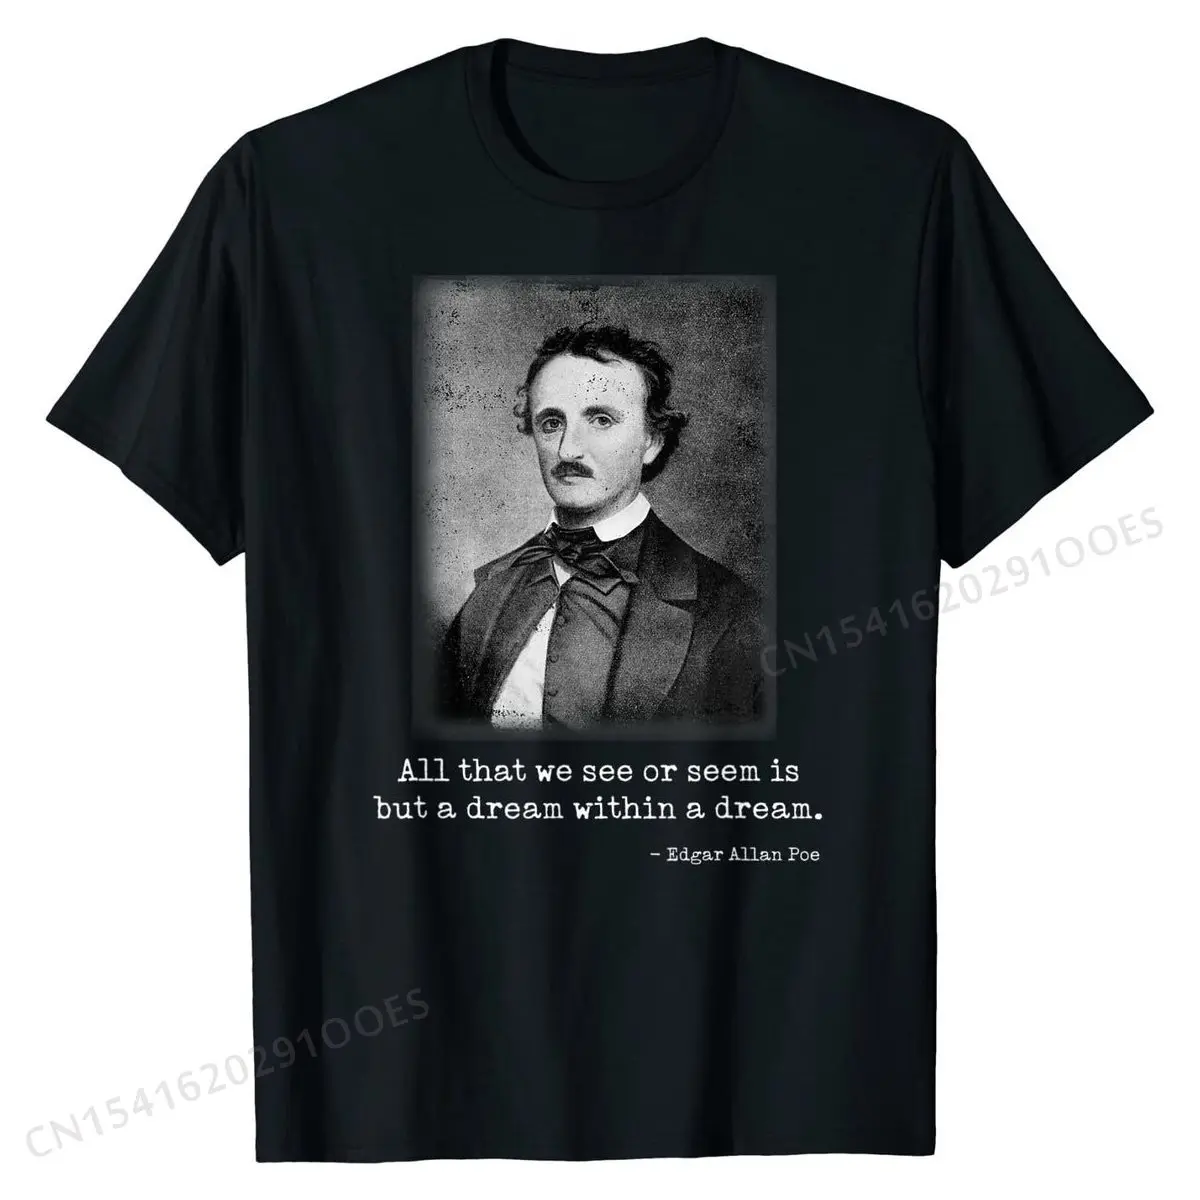 

Edgar Allan Poe Quote All That We See Famous Author Quote T-Shirt Fitted Men Top T-shirts Cotton Tops T Shirt Unique